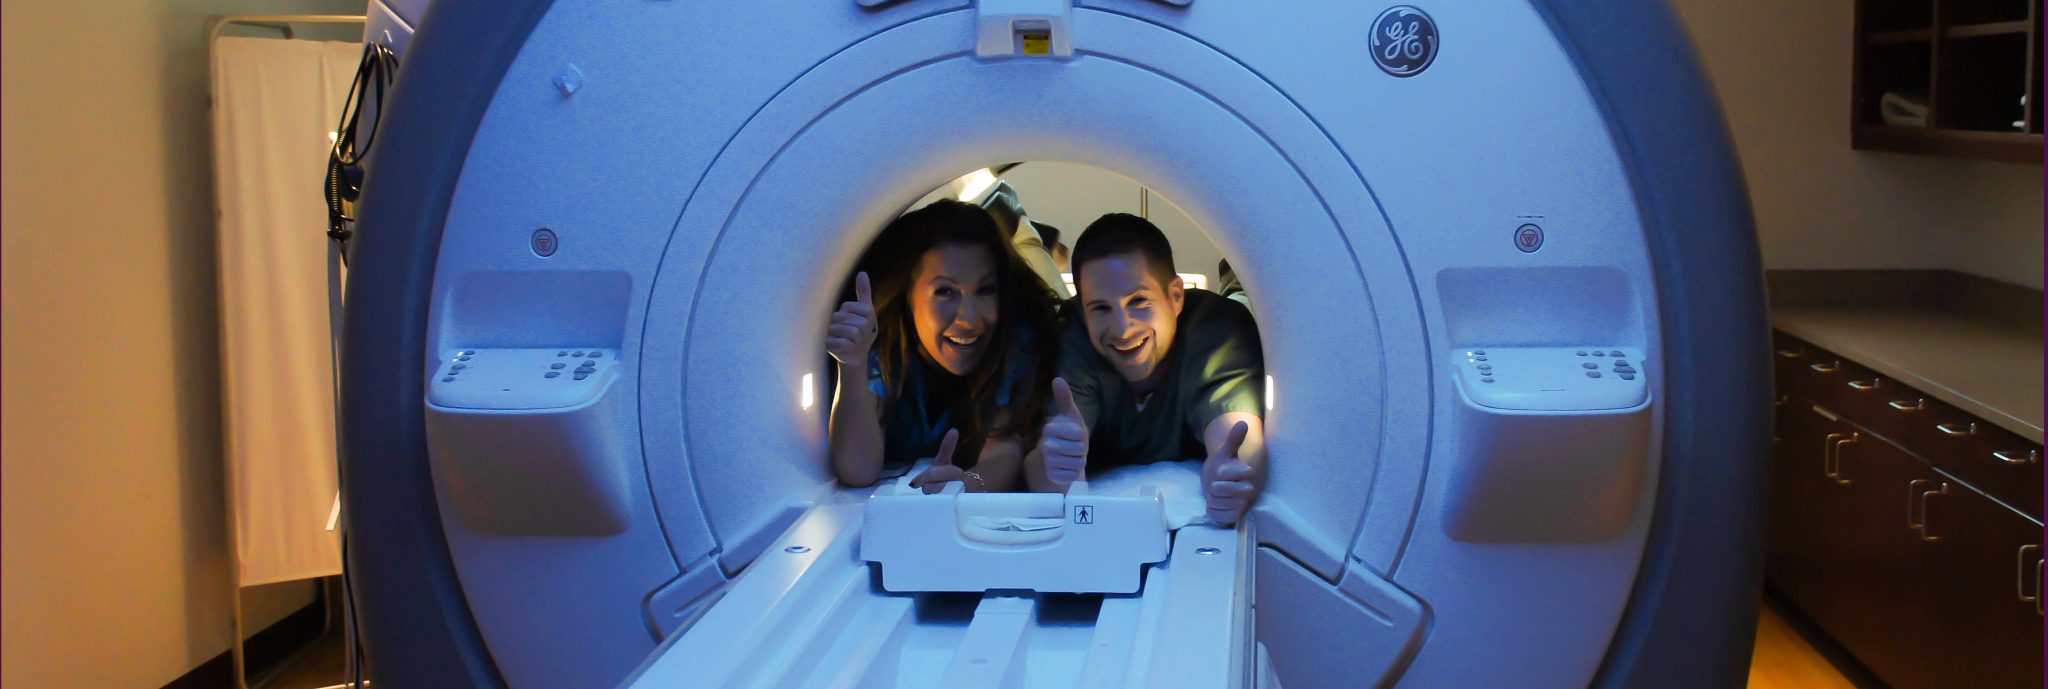 How safe is MRI?